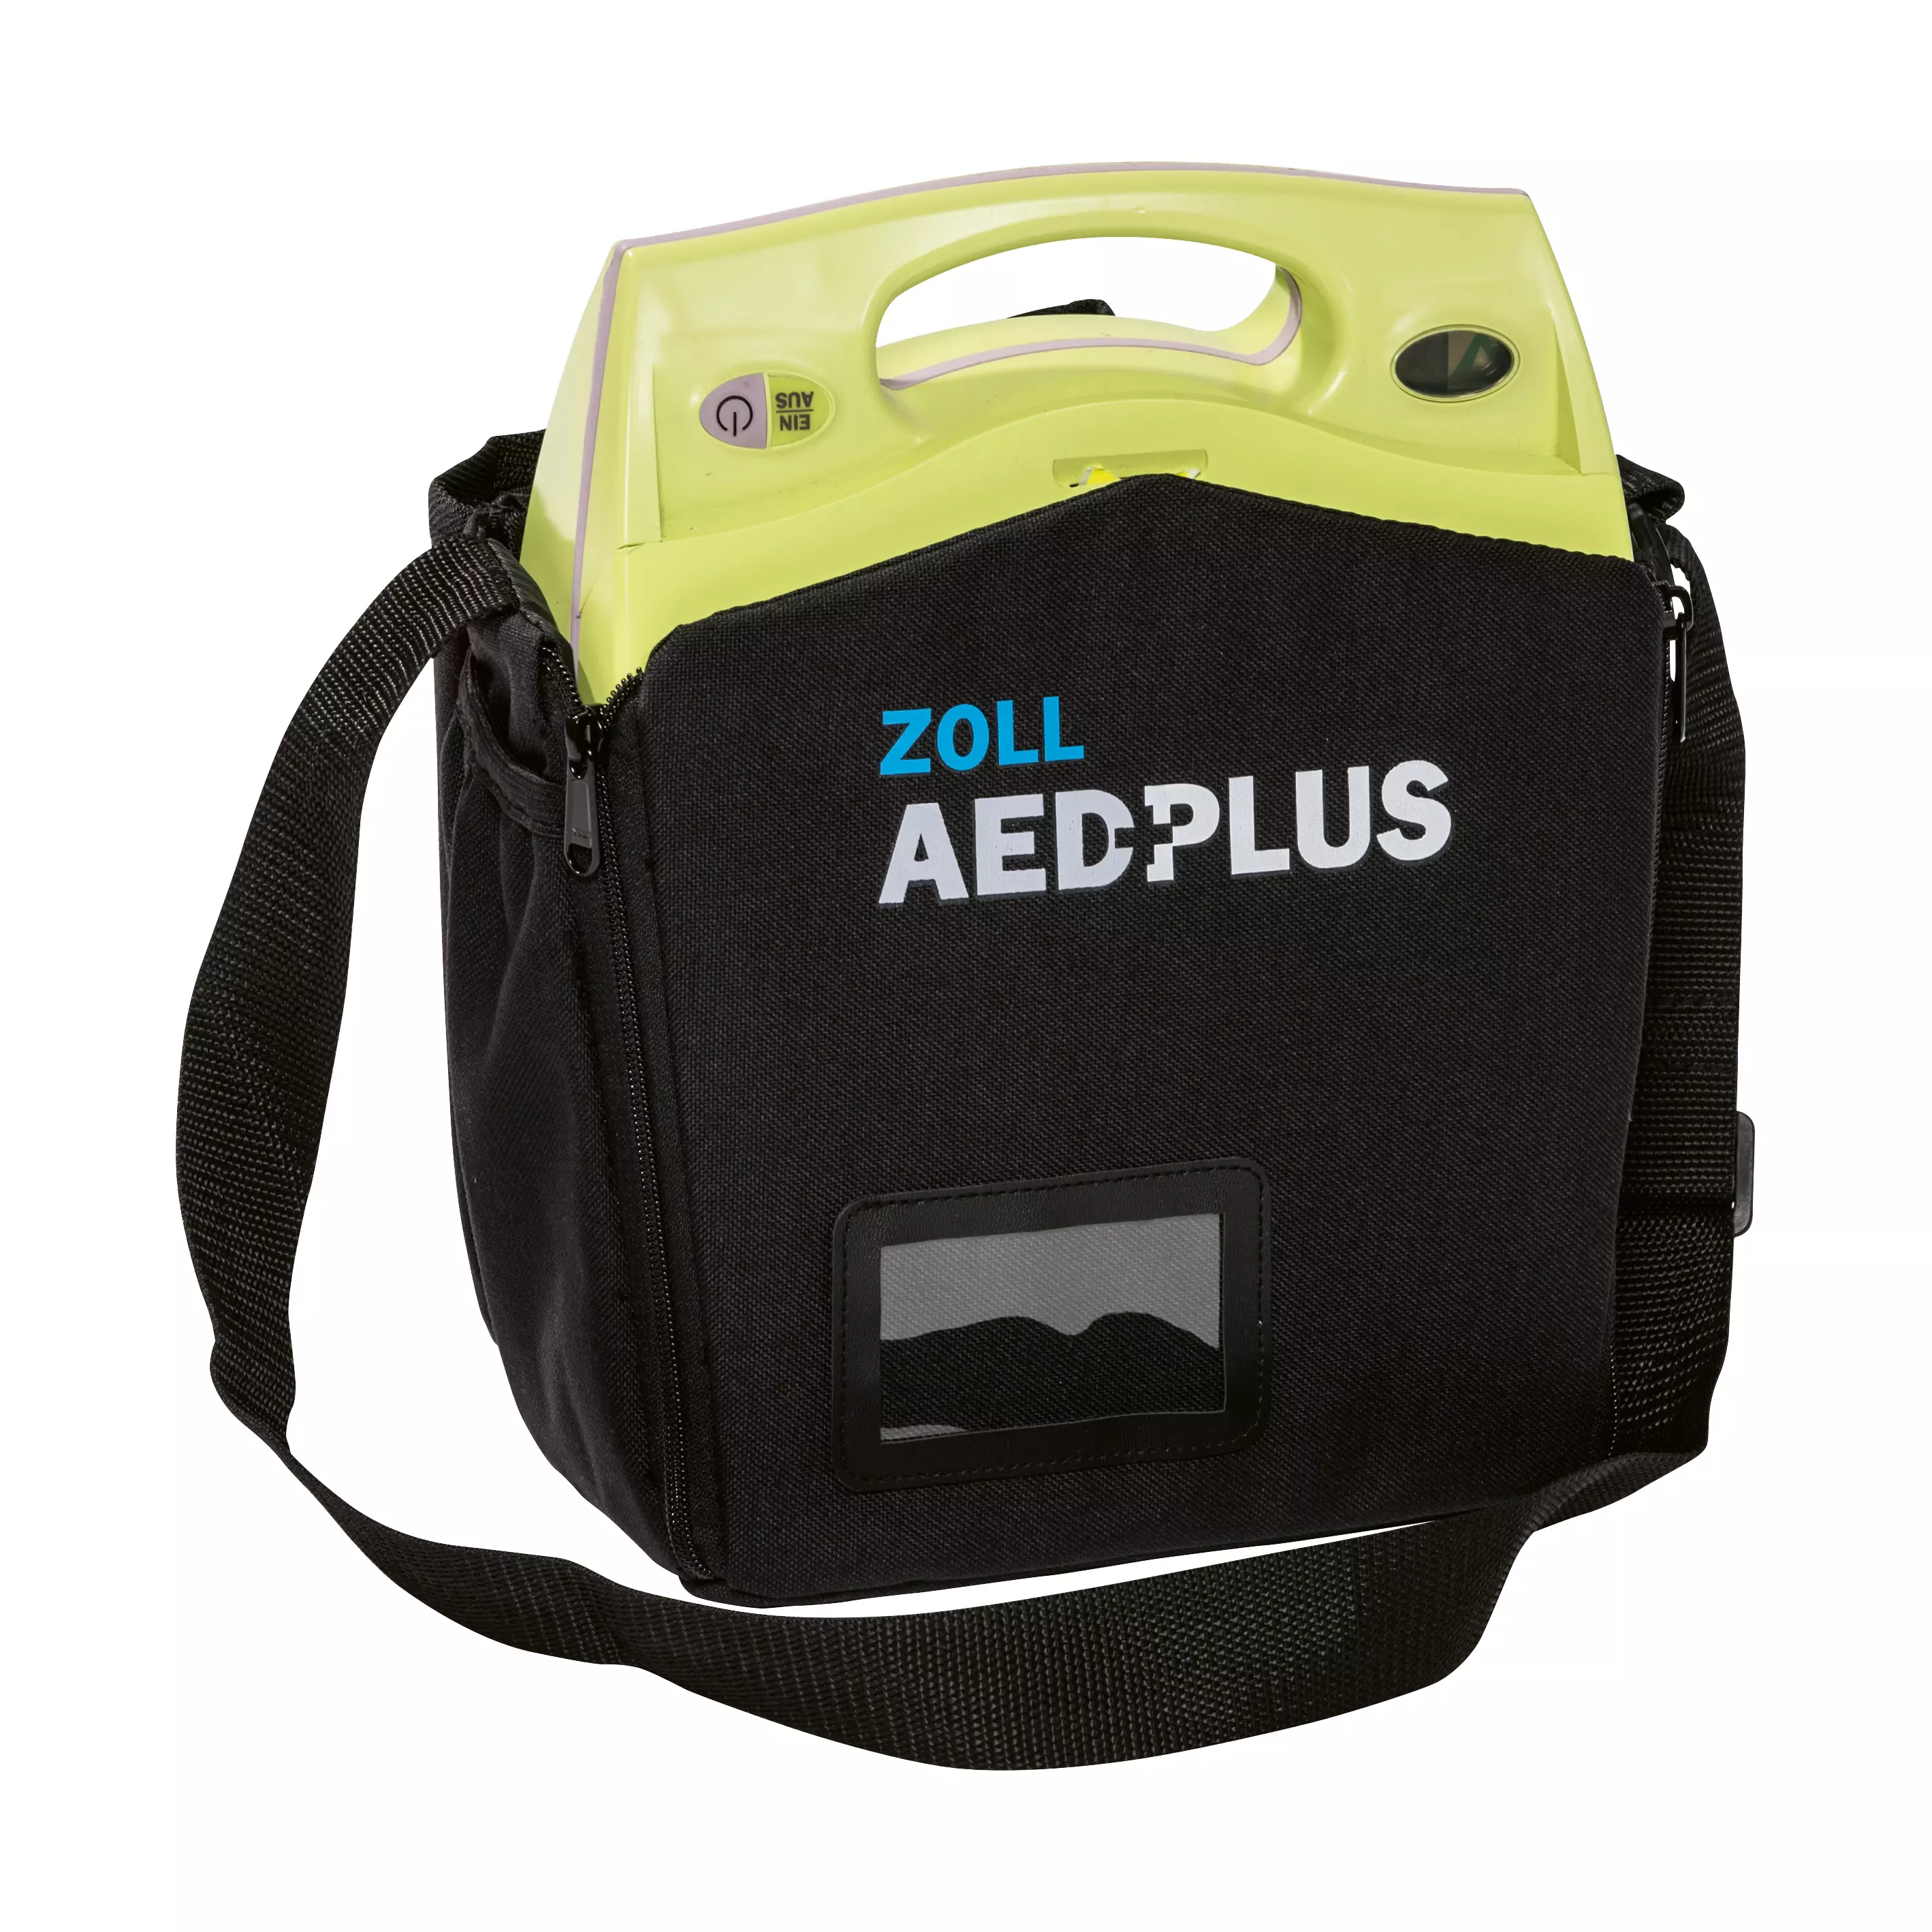 ZOLL AED Plus soft case, empty